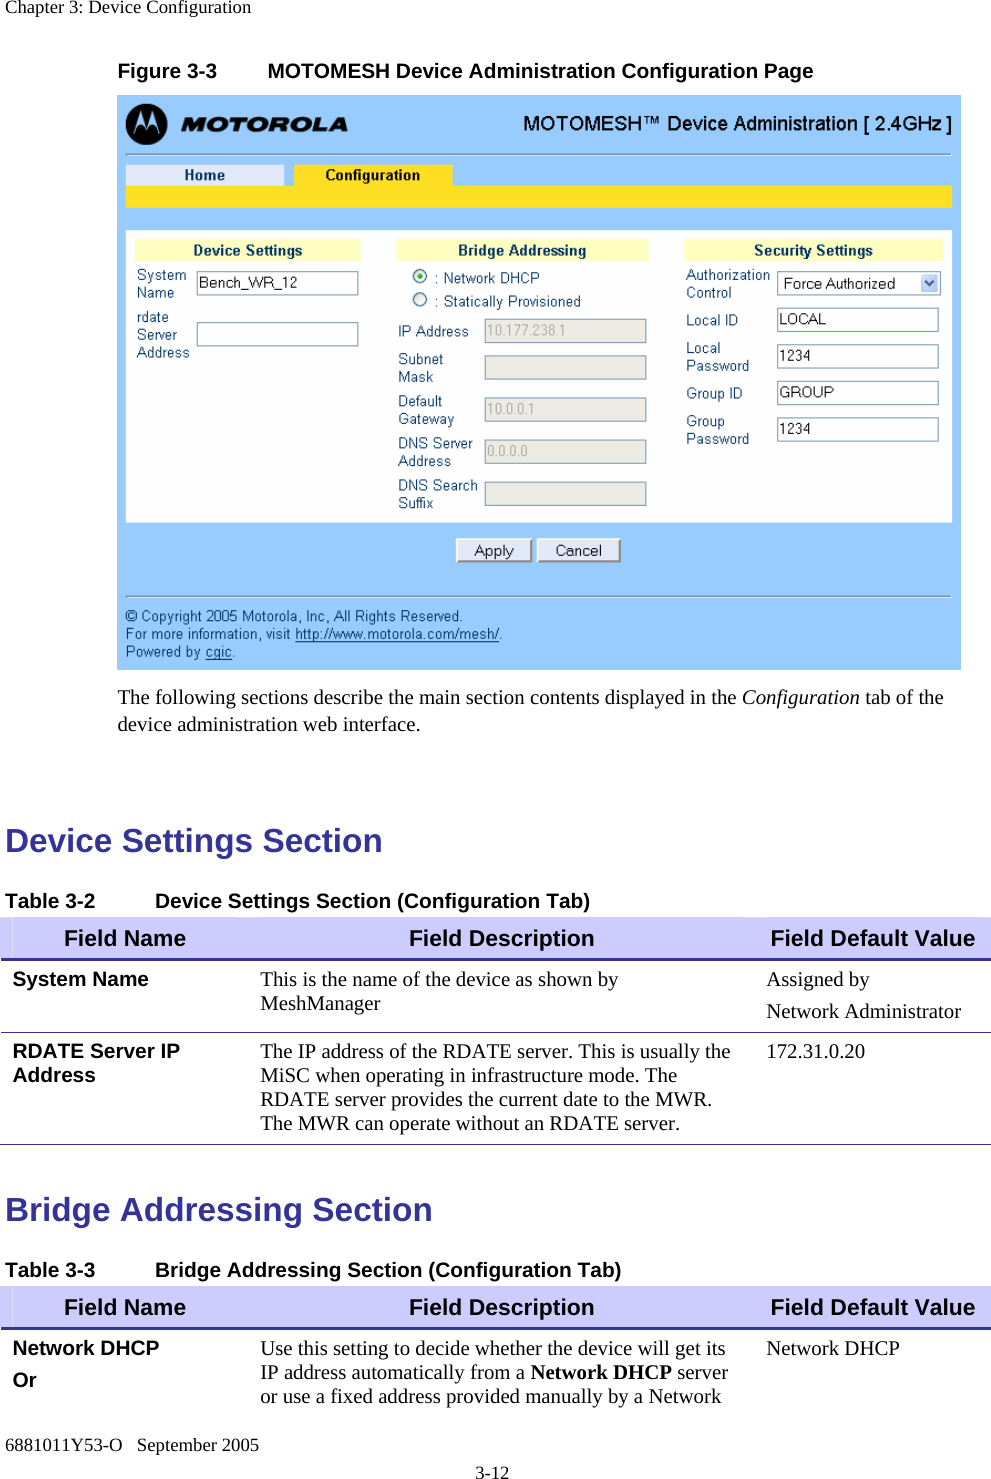 Chapter 3: Device Configuration 6881011Y53-O   September 2005 3-12 Figure 3-3  MOTOMESH Device Administration Configuration Page  The following sections describe the main section contents displayed in the Configuration tab of the device administration web interface.  Device Settings Section Table 3-2  Device Settings Section (Configuration Tab) Field Name  Field Description  Field Default Value System Name  This is the name of the device as shown by MeshManager  Assigned by Network Administrator RDATE Server IP Address  The IP address of the RDATE server. This is usually the MiSC when operating in infrastructure mode. The RDATE server provides the current date to the MWR. The MWR can operate without an RDATE server. 172.31.0.20  Bridge Addressing Section Table 3-3  Bridge Addressing Section (Configuration Tab) Field Name  Field Description  Field Default Value Network DHCP Or  Use this setting to decide whether the device will get its IP address automatically from a Network DHCP server or use a fixed address provided manually by a Network Network DHCP 